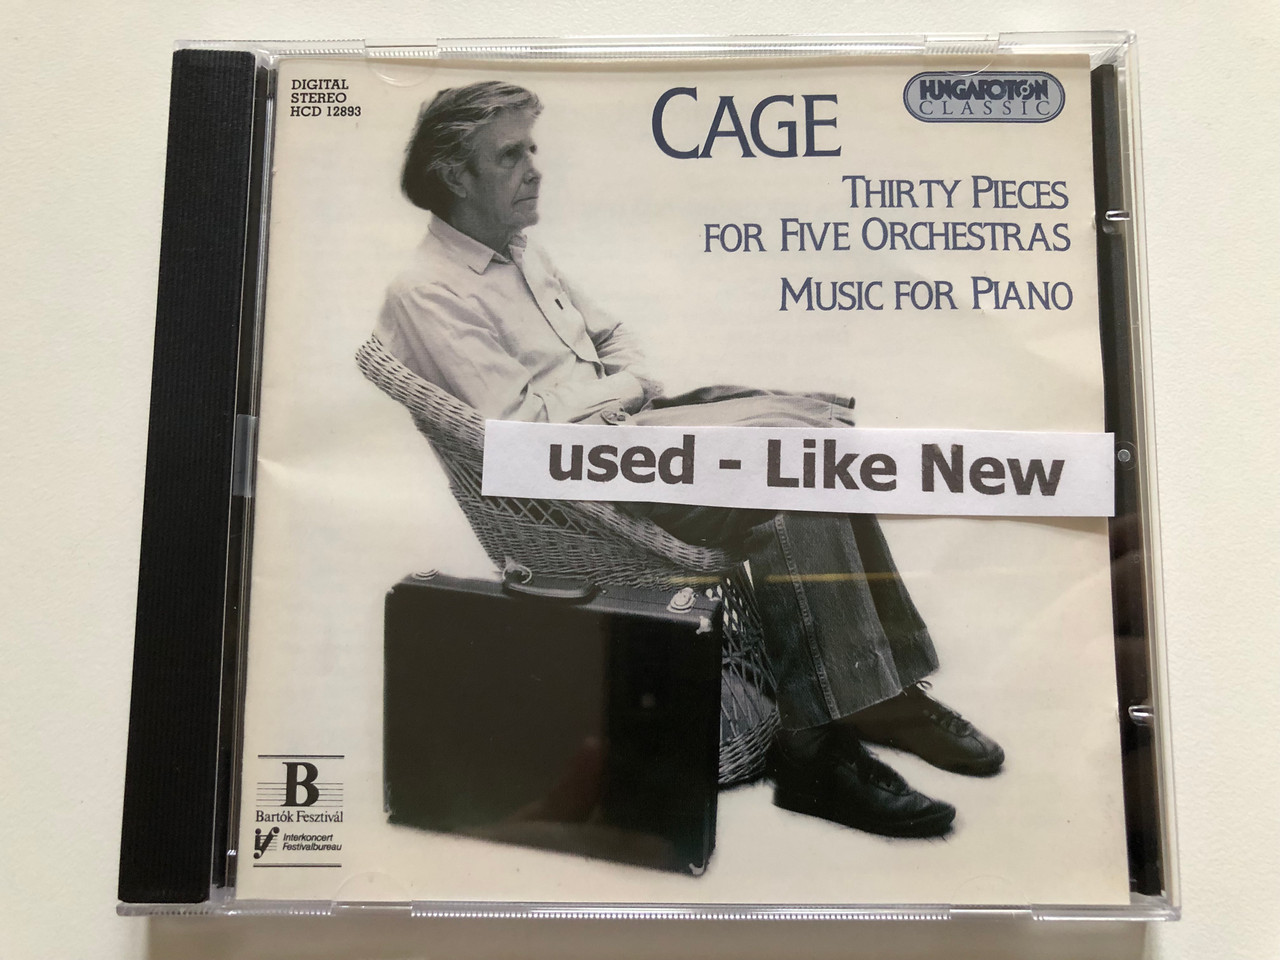 https://cdn10.bigcommerce.com/s-62bdpkt7pb/products/0/images/310793/Cage_Thirty_Pieces_For_Five_Orchestras_Music_For_Piano_Hungaroton_Classic_Audio_CD_2001_Stereo_HCD_12893_4__85909.1699454441.1280.1280.JPG?c=2